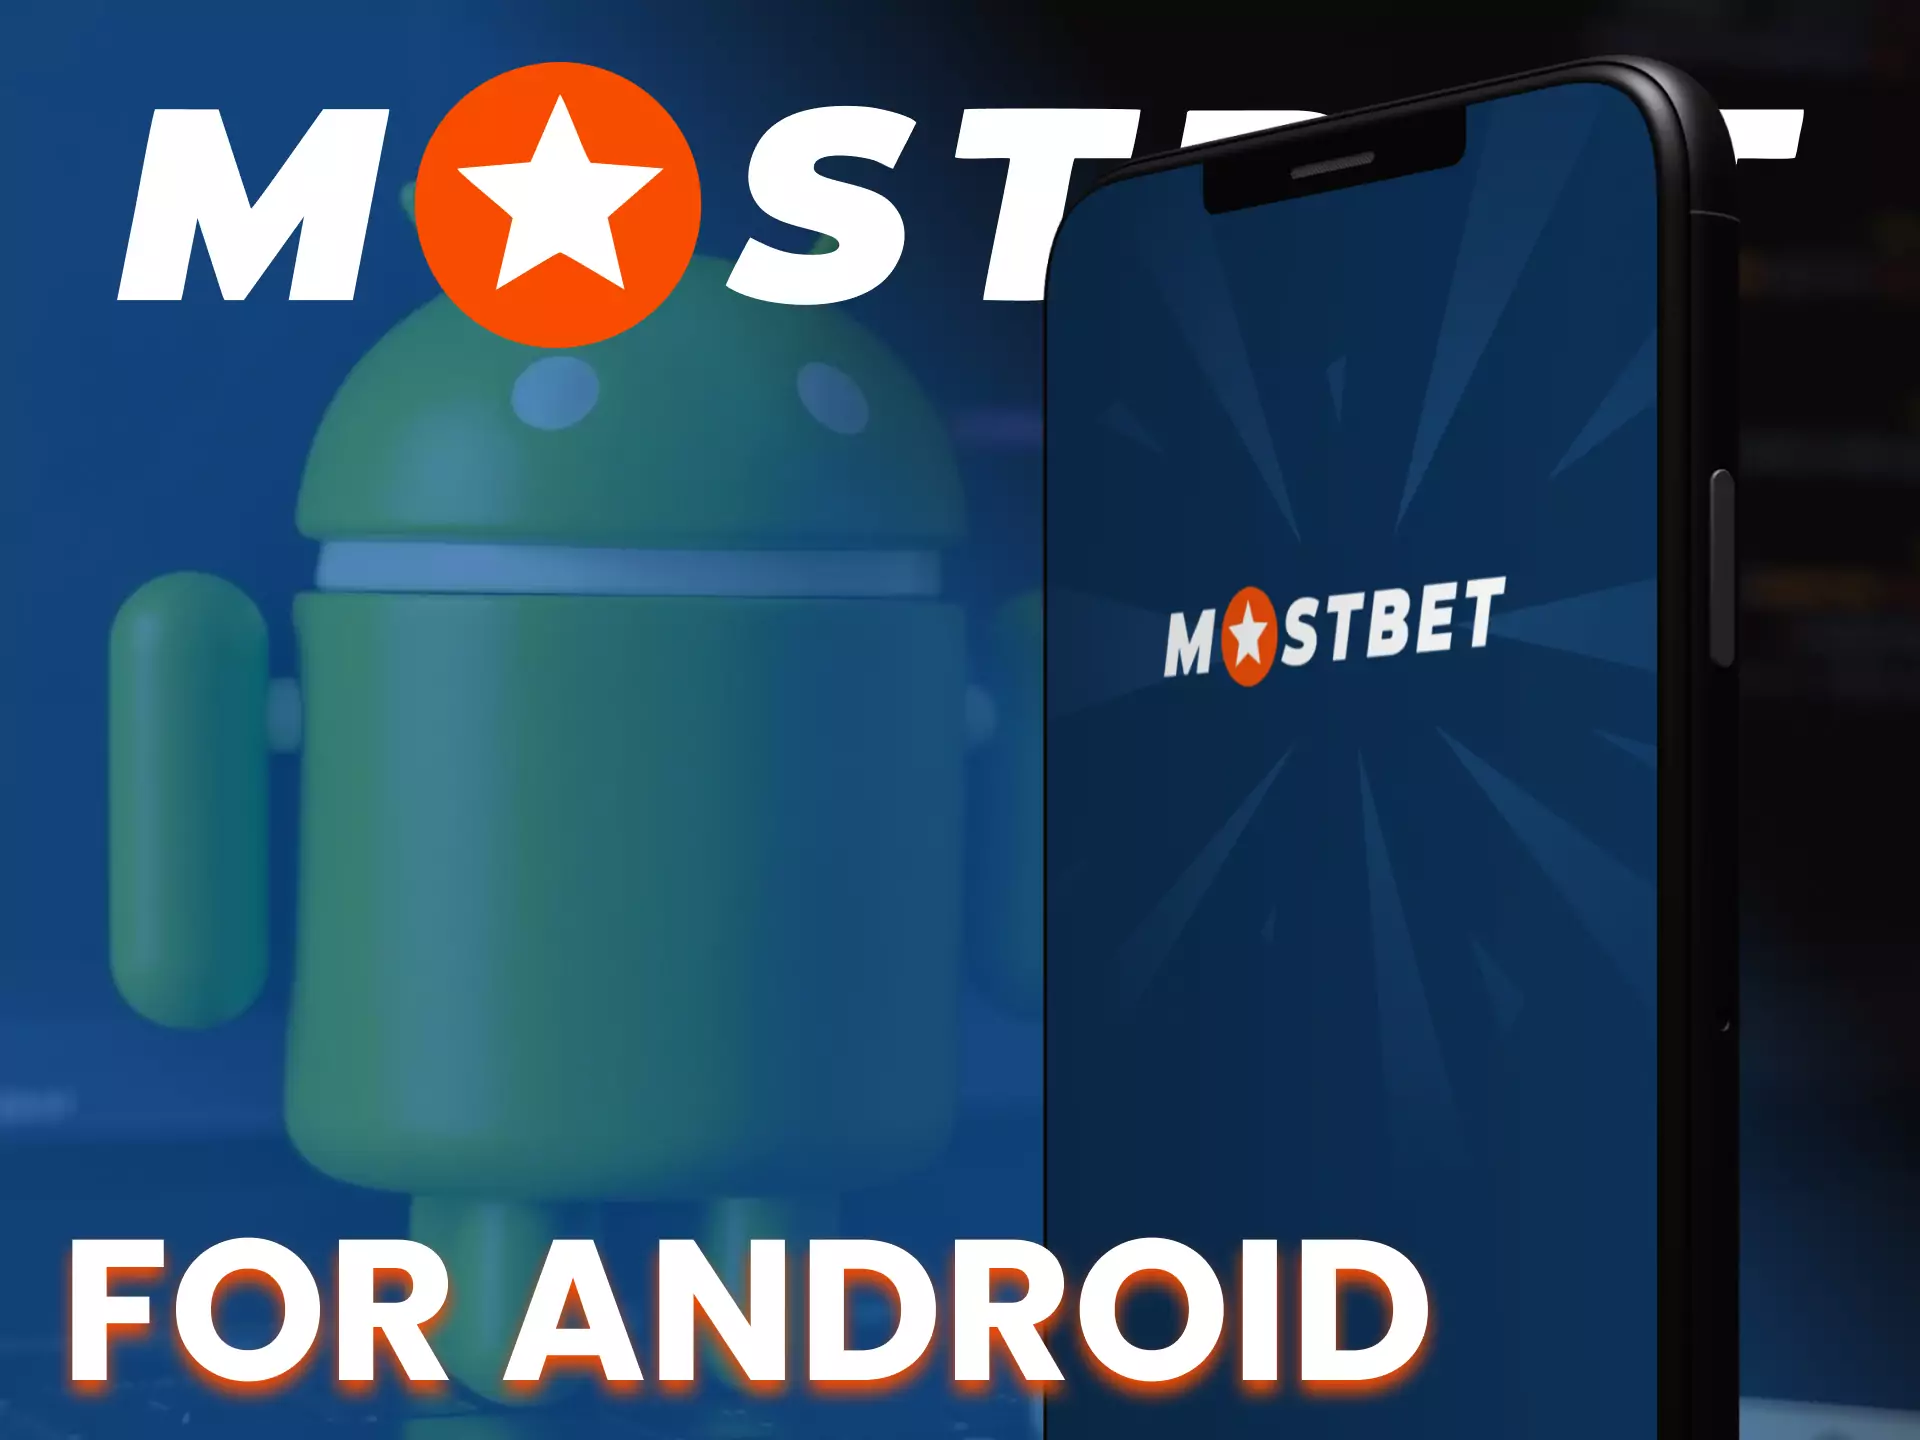 Mostbet has an app for Android phones to bet and play casino games.